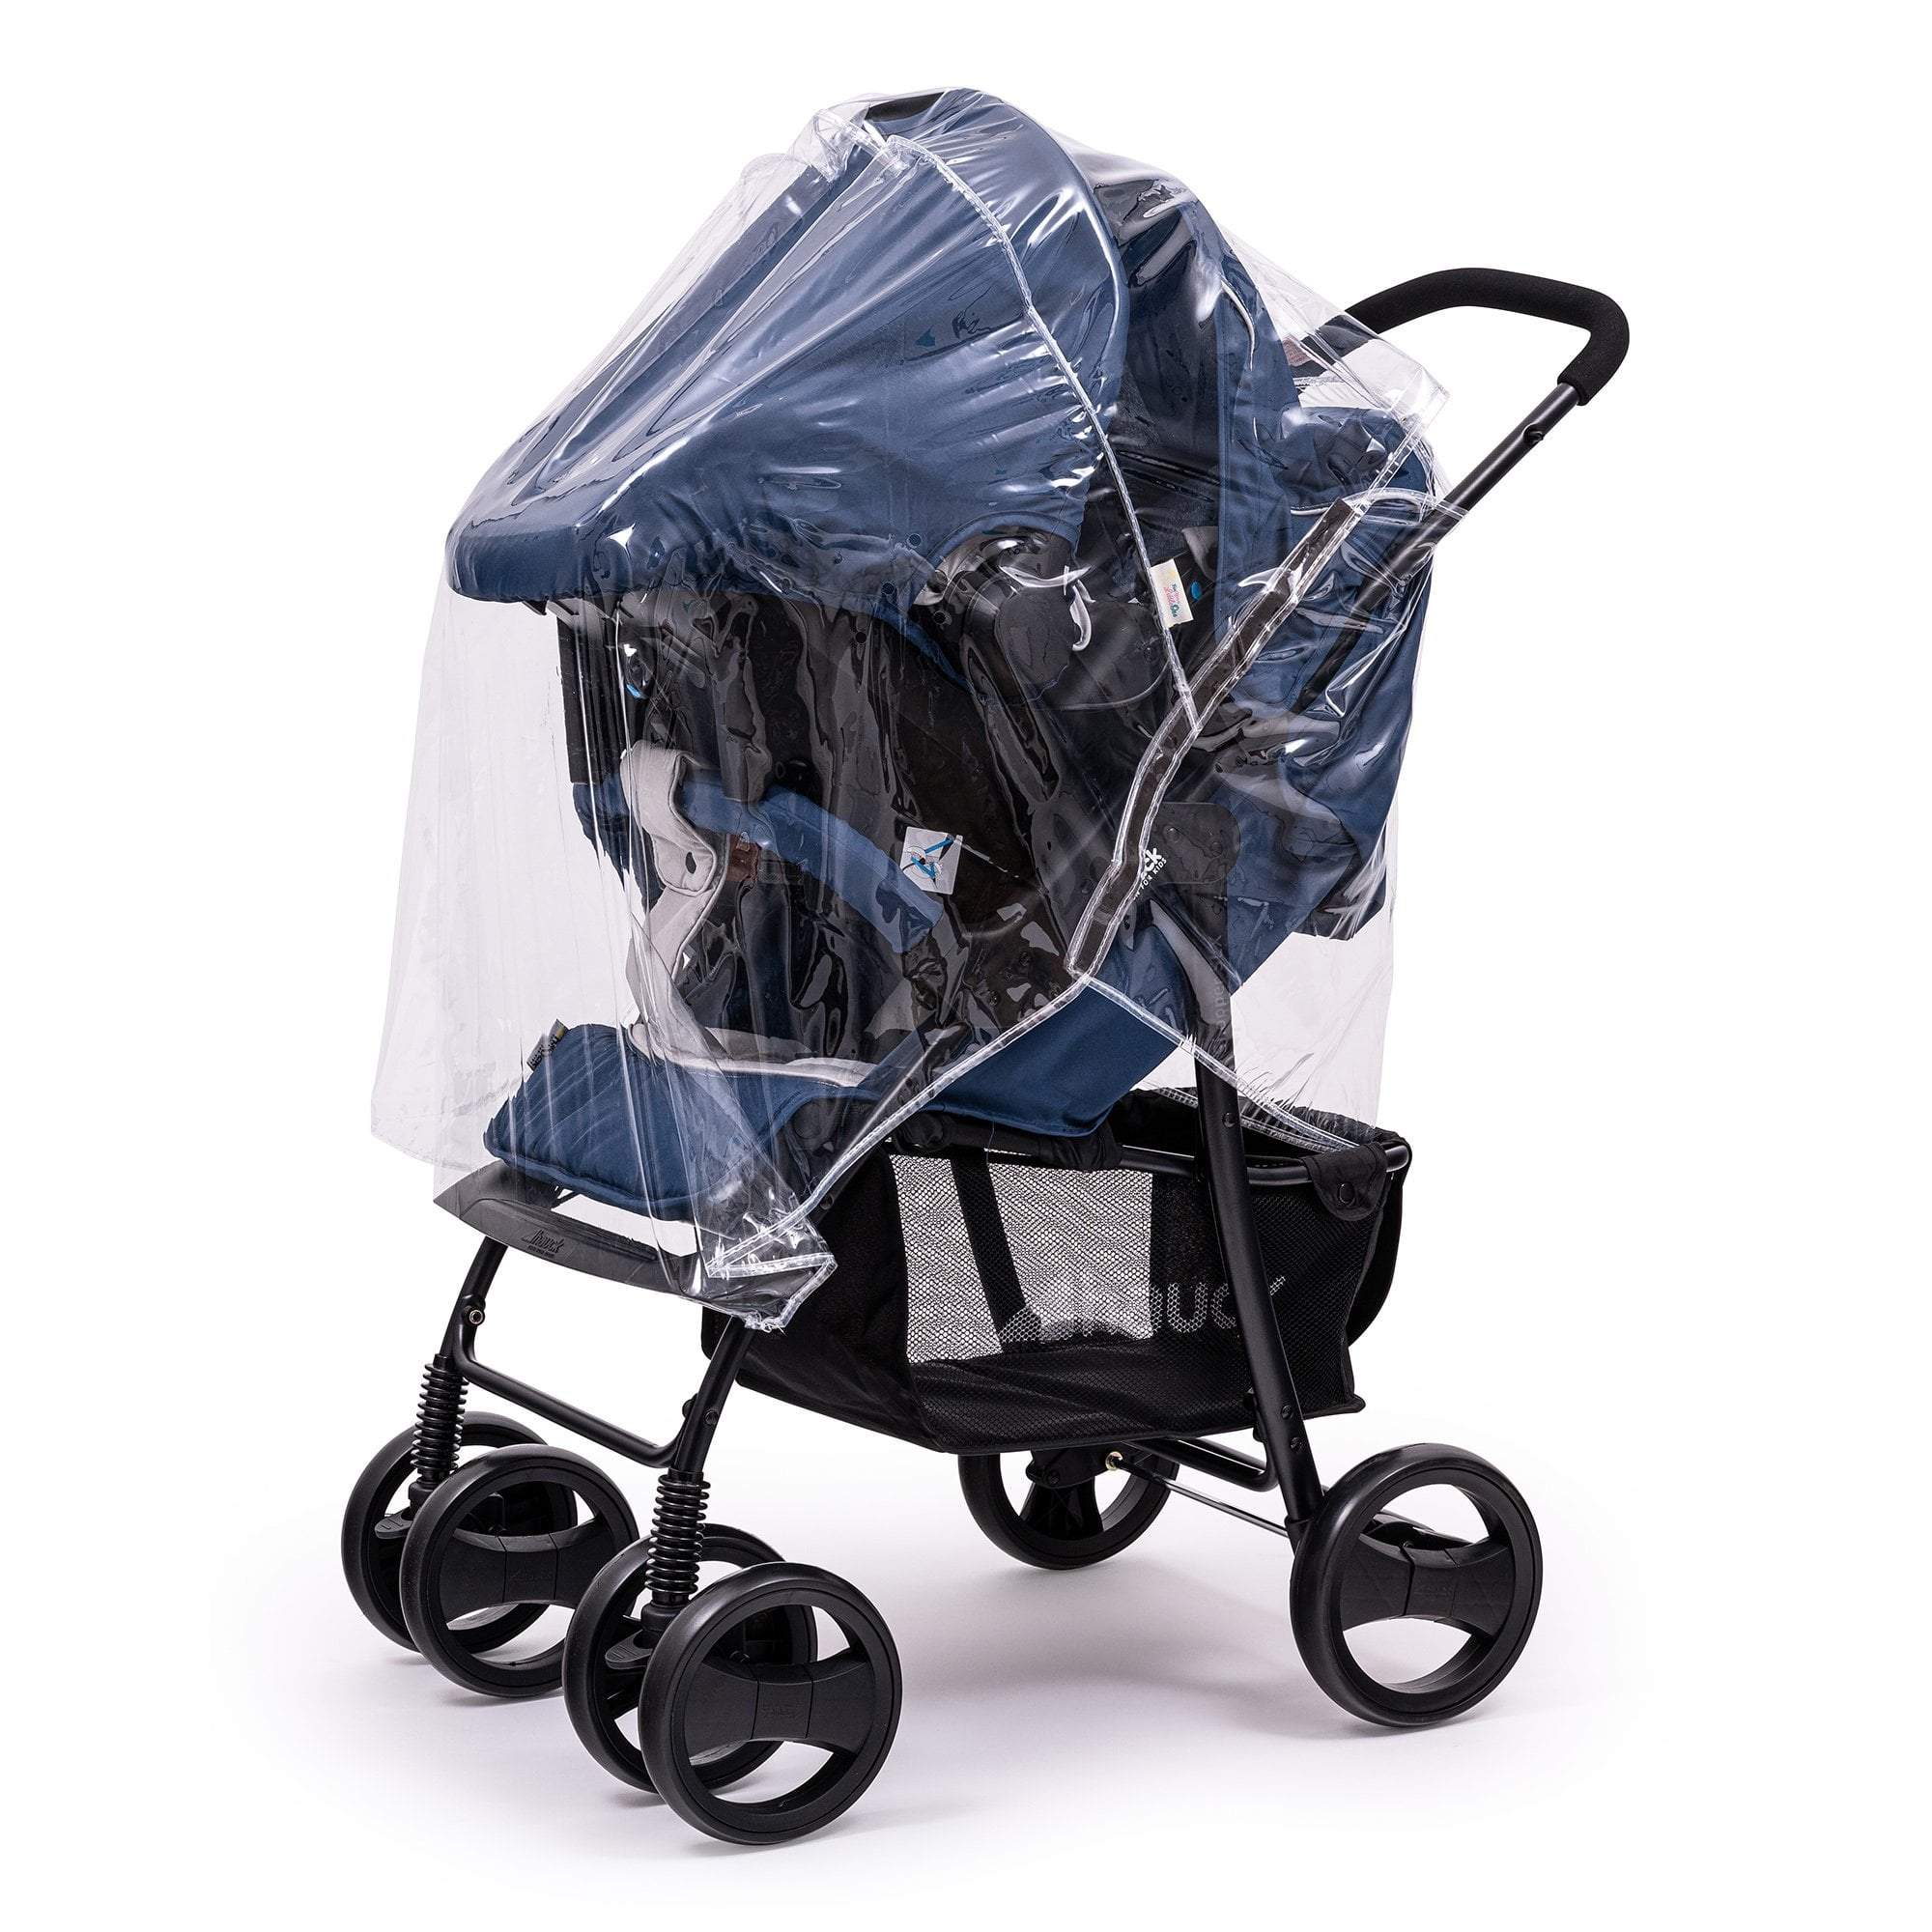 Travel System Raincover Compatible with Koochi - Fits All Models - For Your Little One